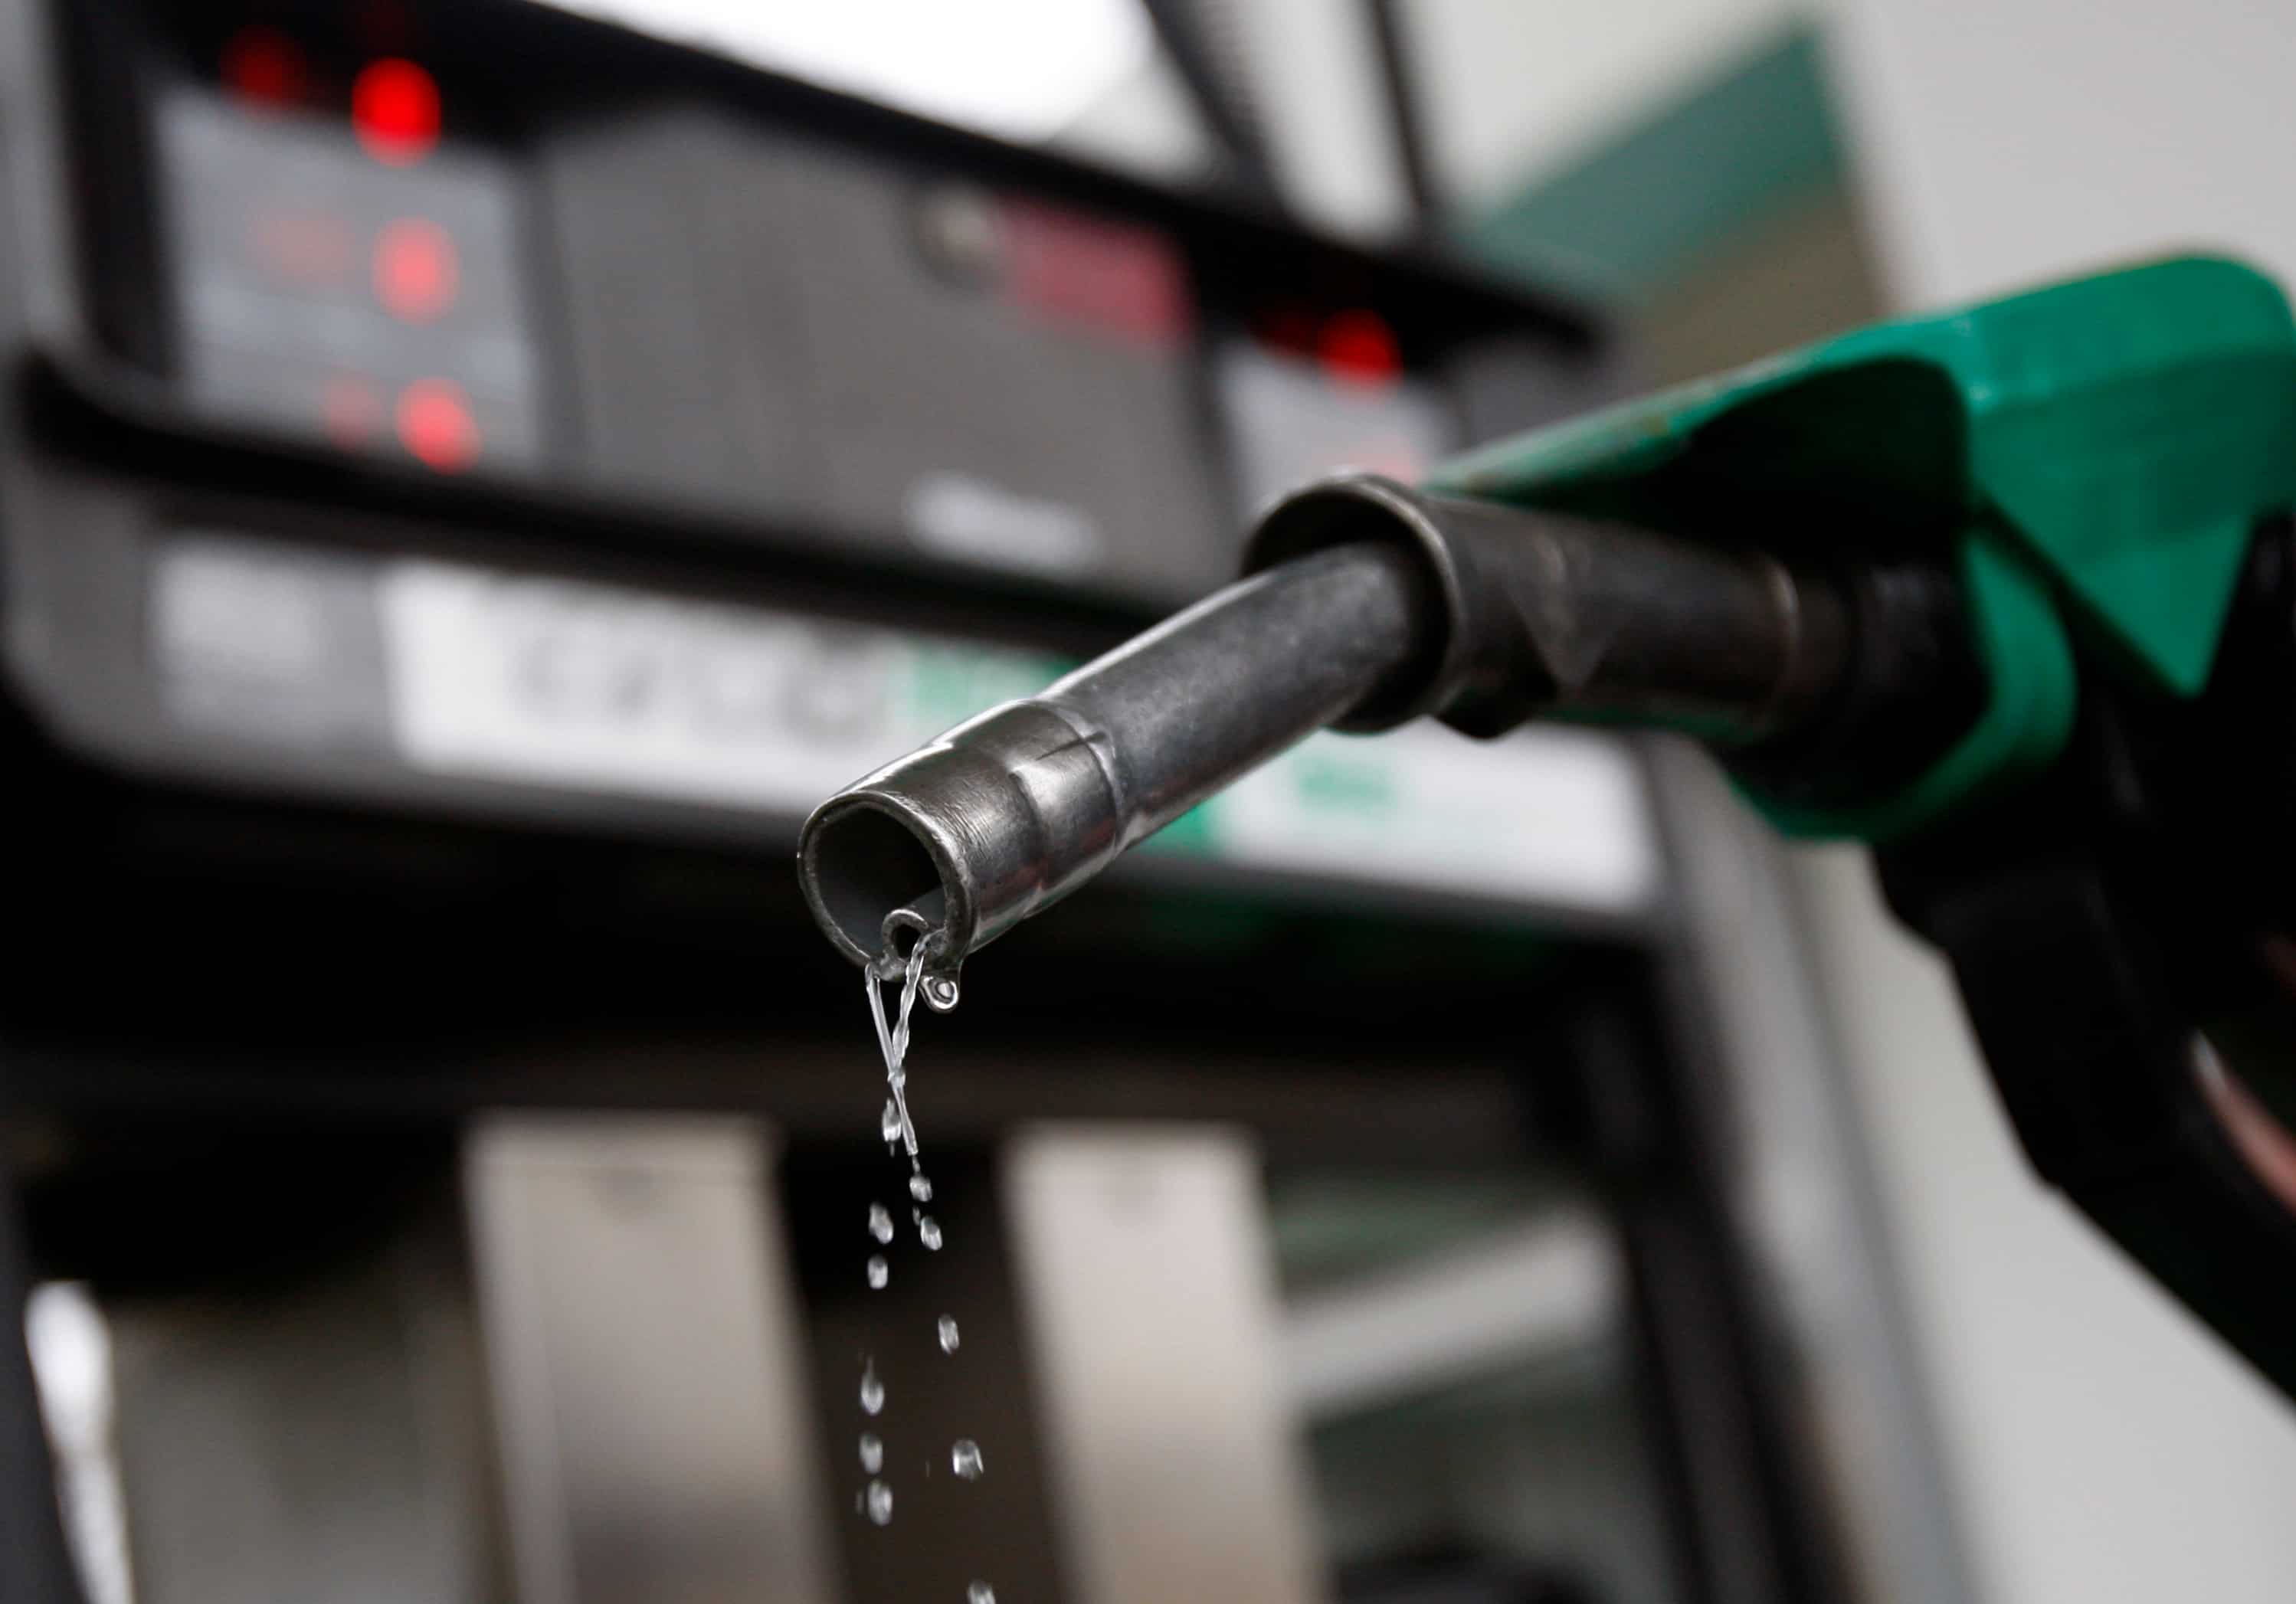 Petrol-Diesel Prices Today: Check petrol and diesel prices in Mumbai 